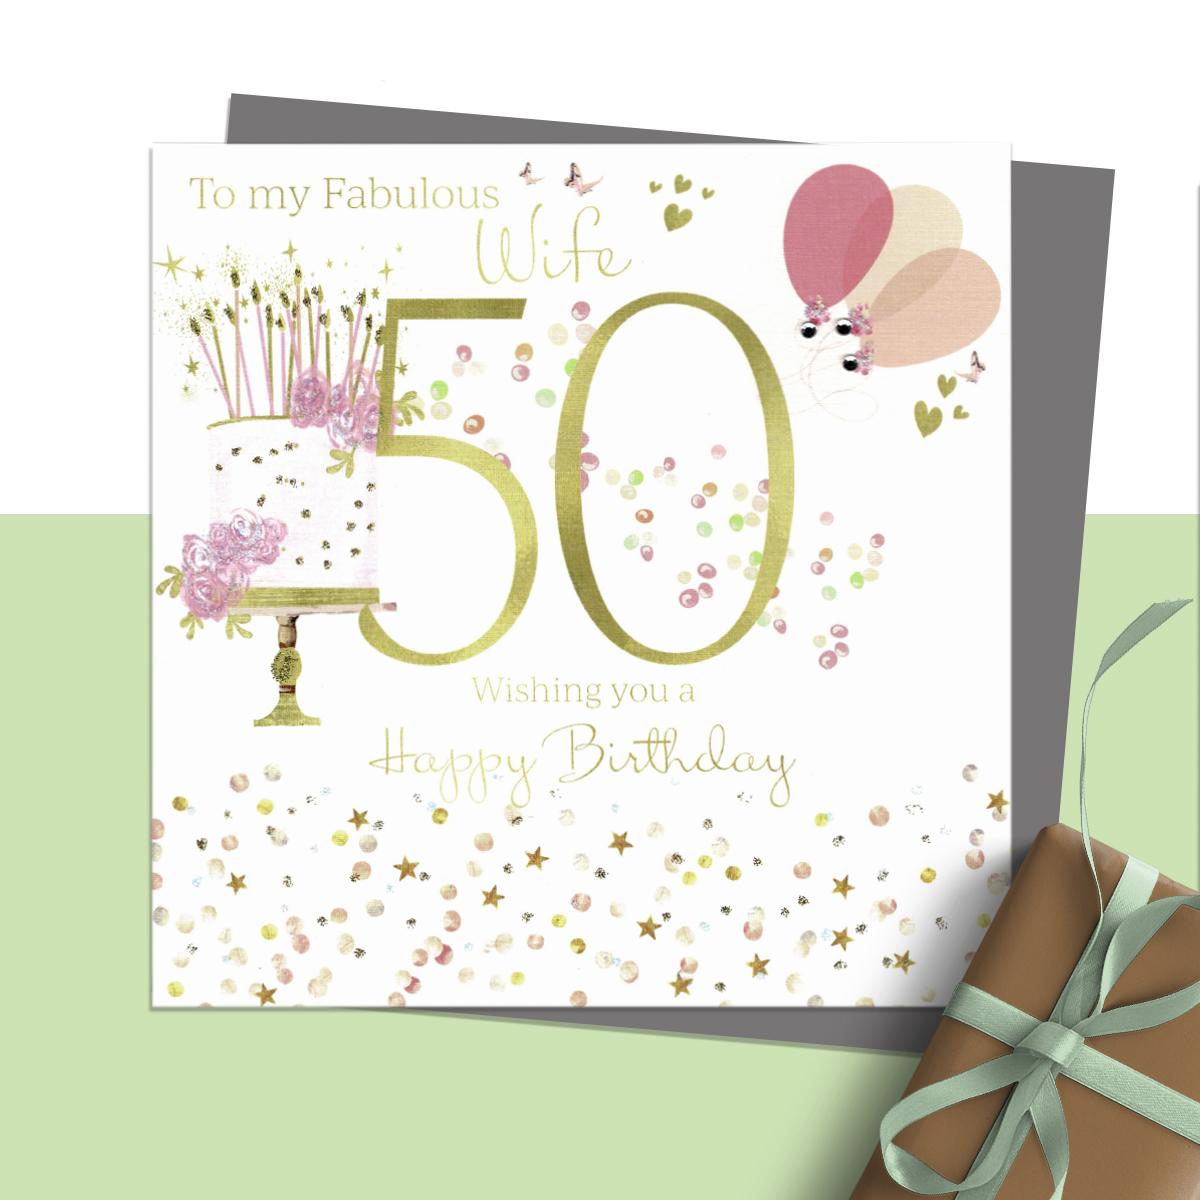 To My Fabulous Wife 50 Wishing You A Happy Birthday' Featuring Cake, Candles And Balloons'. Hand Finished With Sparkle And Jewel Embellishments. Hand Finished With Sparkle And Jewel Embellishments. Blank Inside For Own Message. Complete With Silver Coloured Envelope